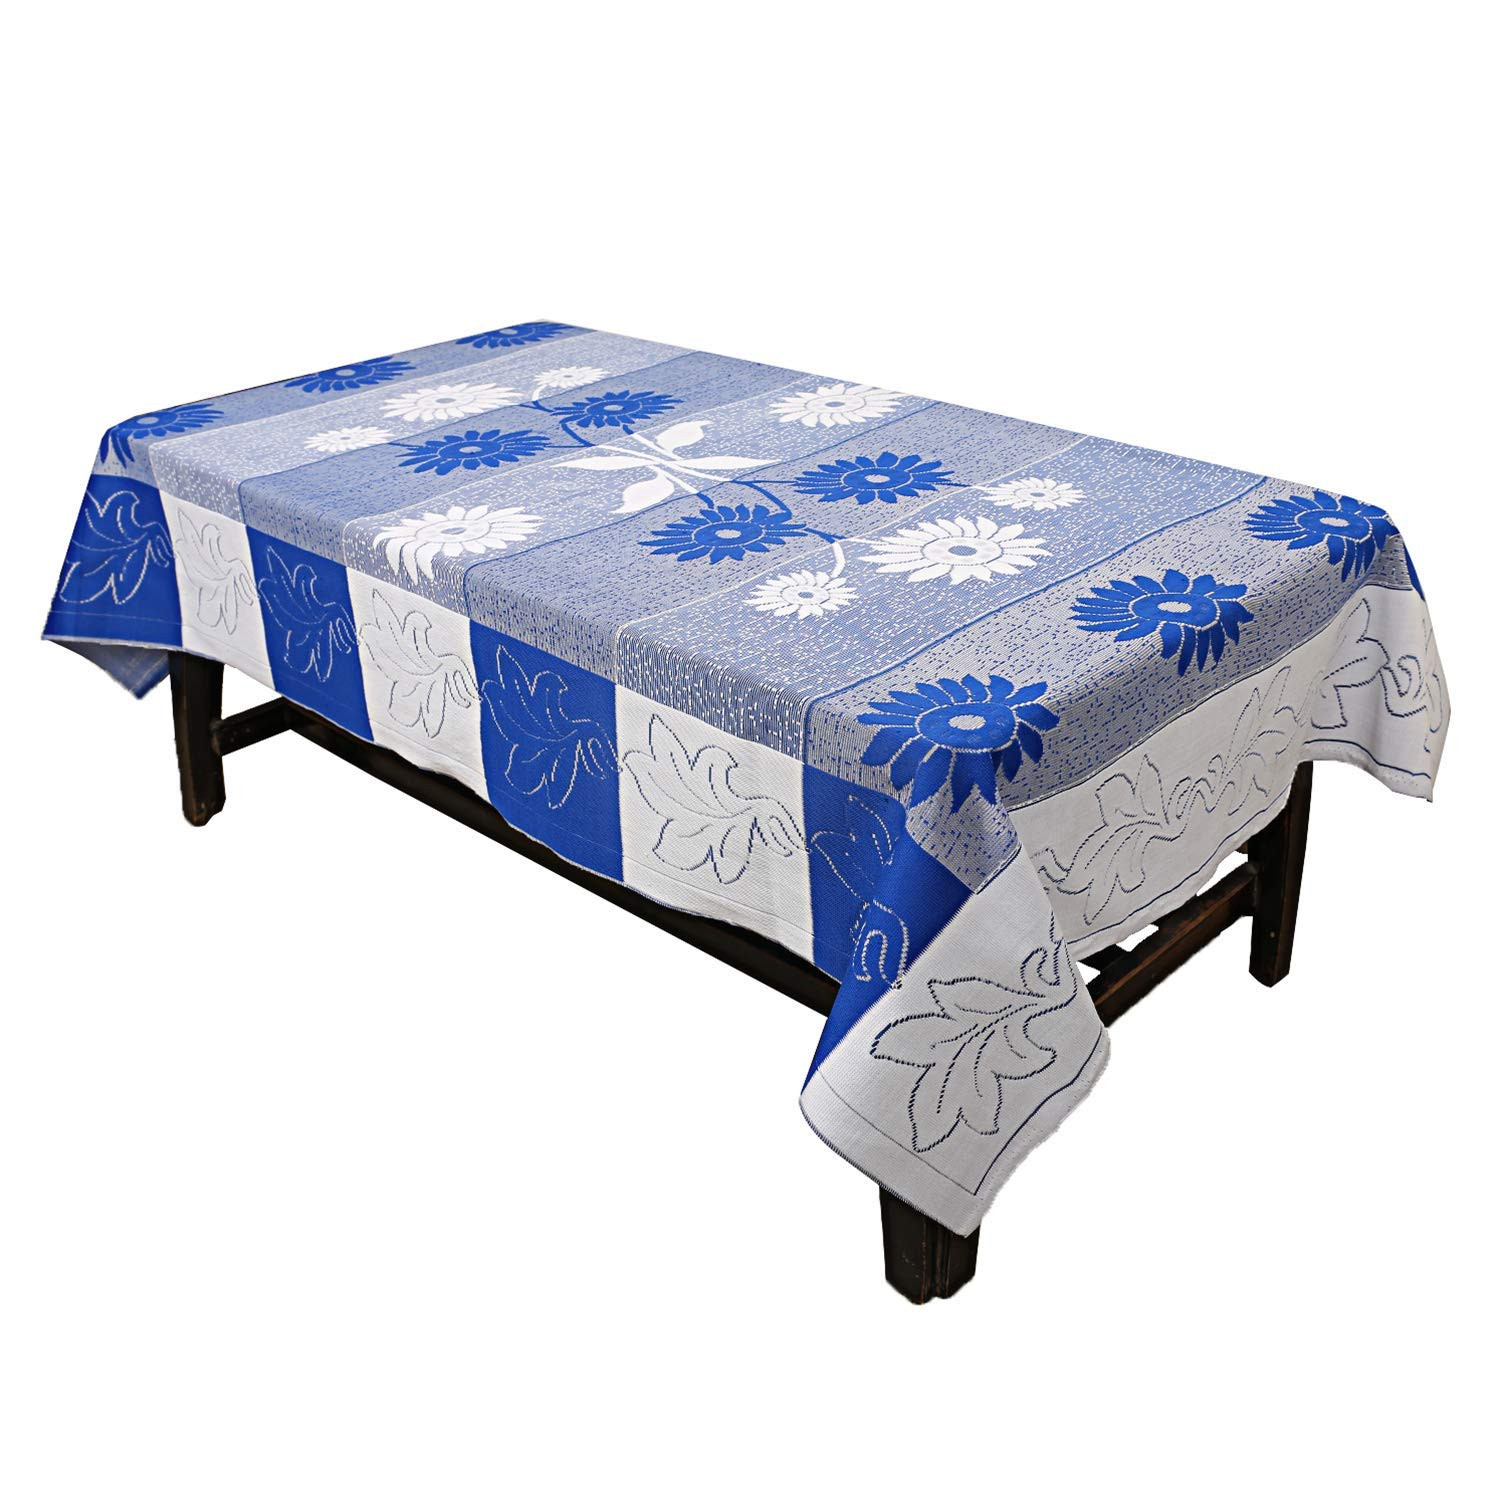 Kuber Industries Flower Design Cotton 5 Seater Sofa Cover With 6 Pieces Arms cover And 1 Center Table Cover Use Both Side, Living Room, Drawing Room, Bedroom, Guest Room (Set Of17, Blue)-KUBMRT12023